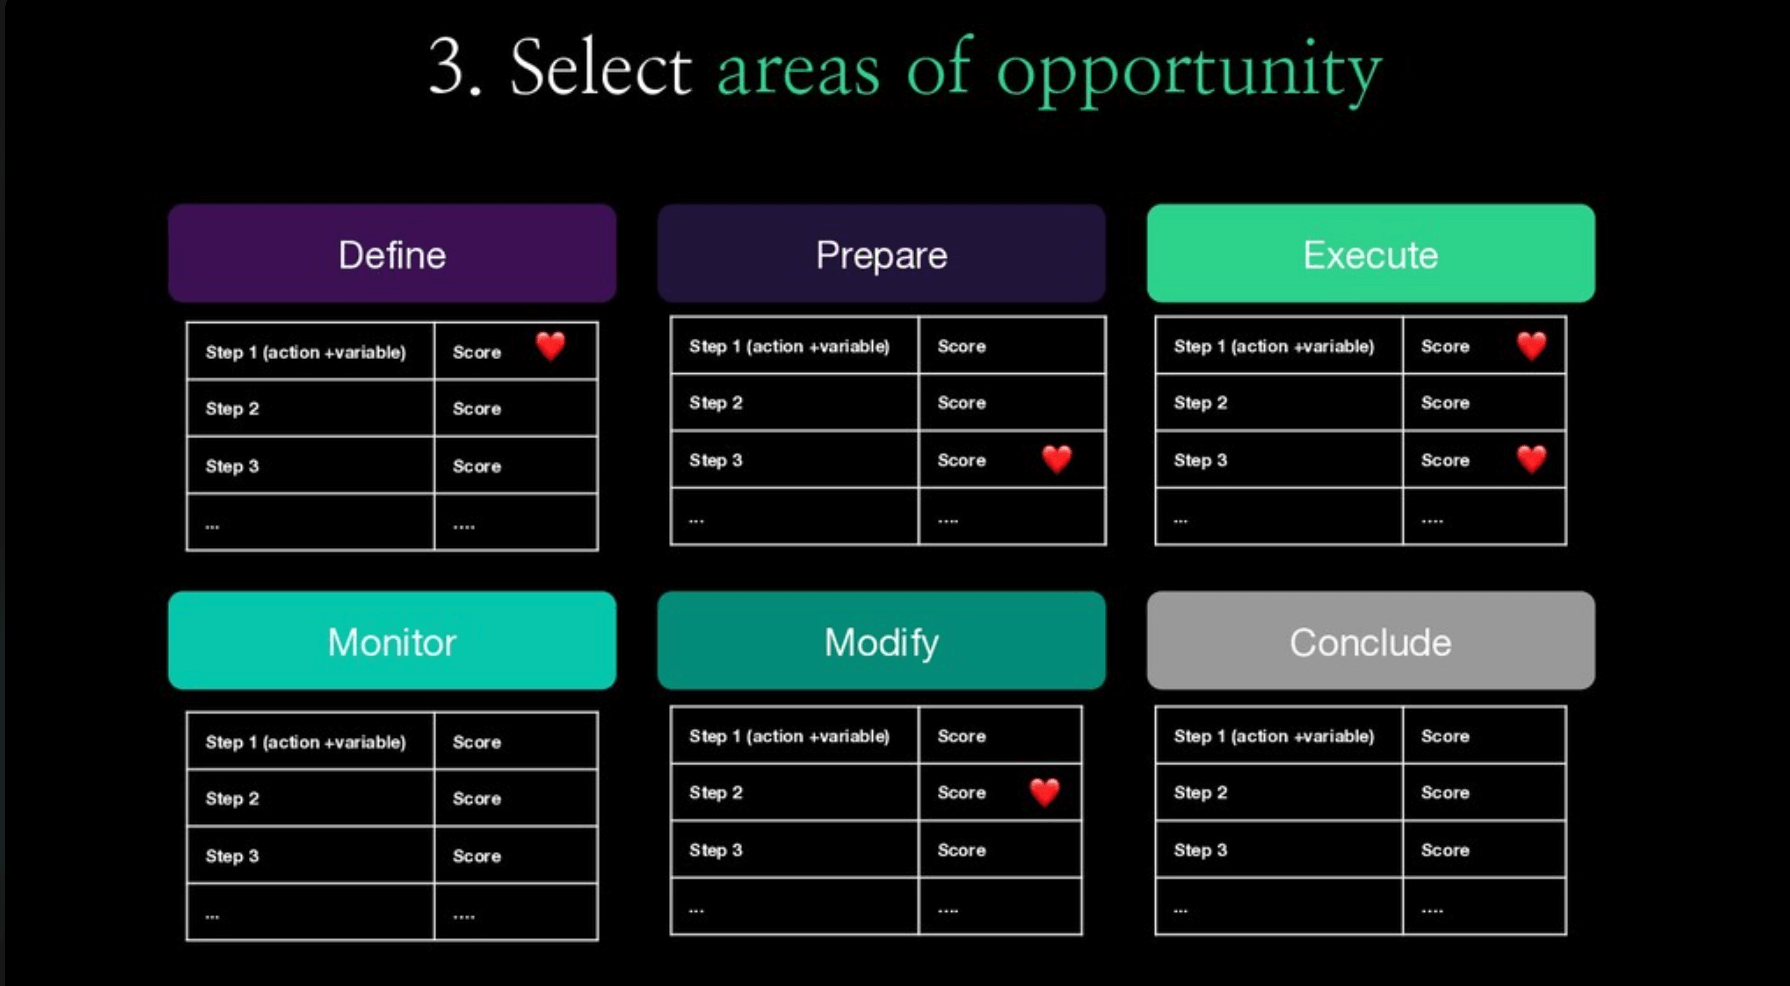 Select areas of opportunity.